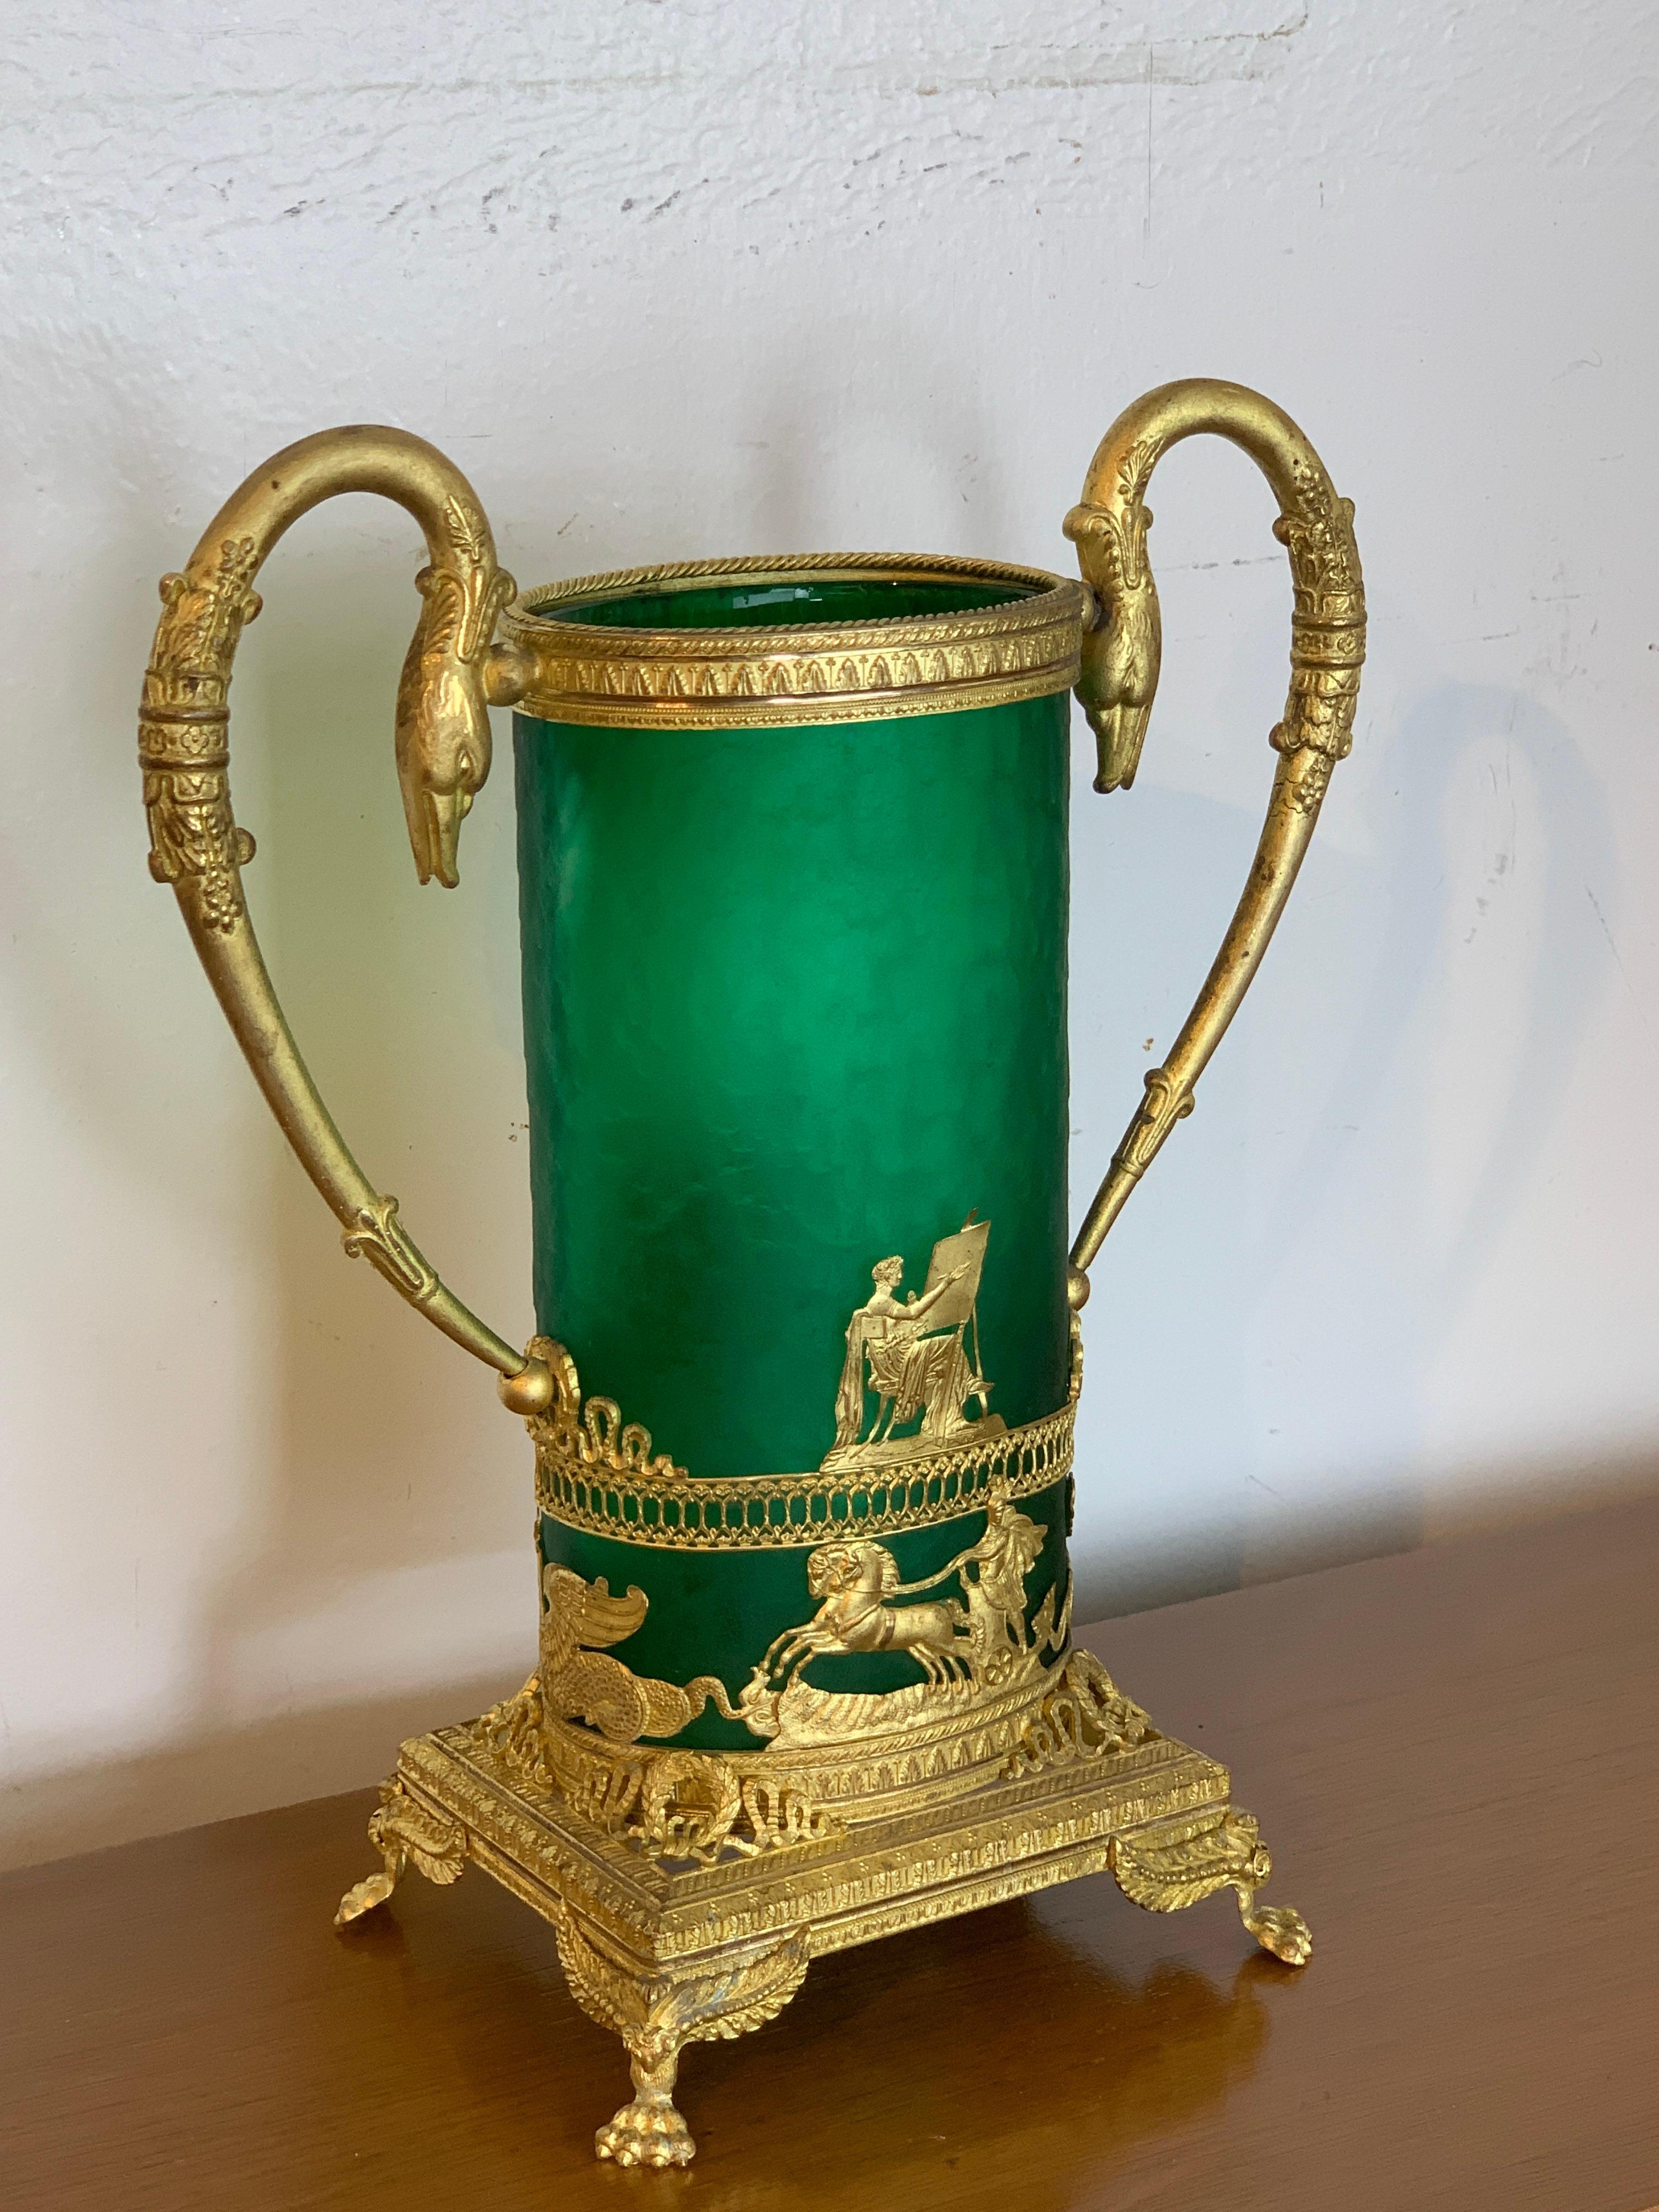 Exquisite Baccarat Empire Style Ormolu Mounted Vase, in Green 2